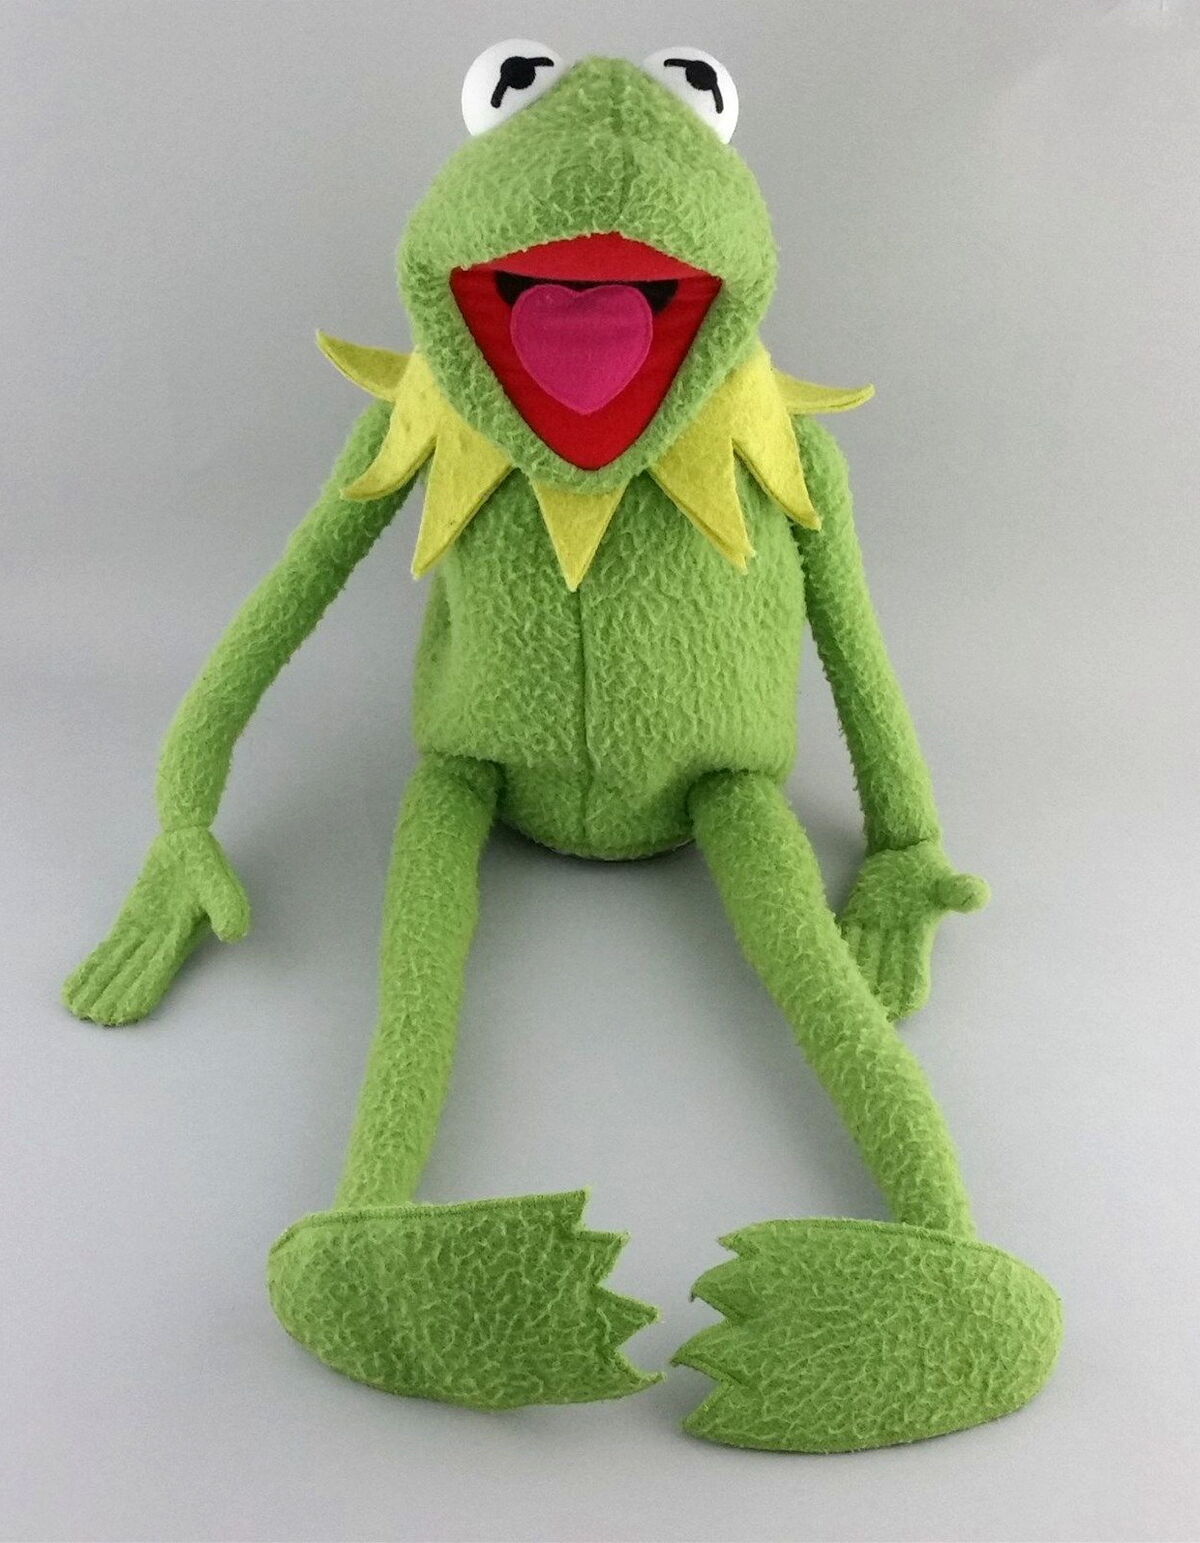 https://static.wikia.nocookie.net/muppet/images/a/a4/Eden_Kermit_puppet.jpg/revision/latest/scale-to-width-down/1200?cb=20171209060040